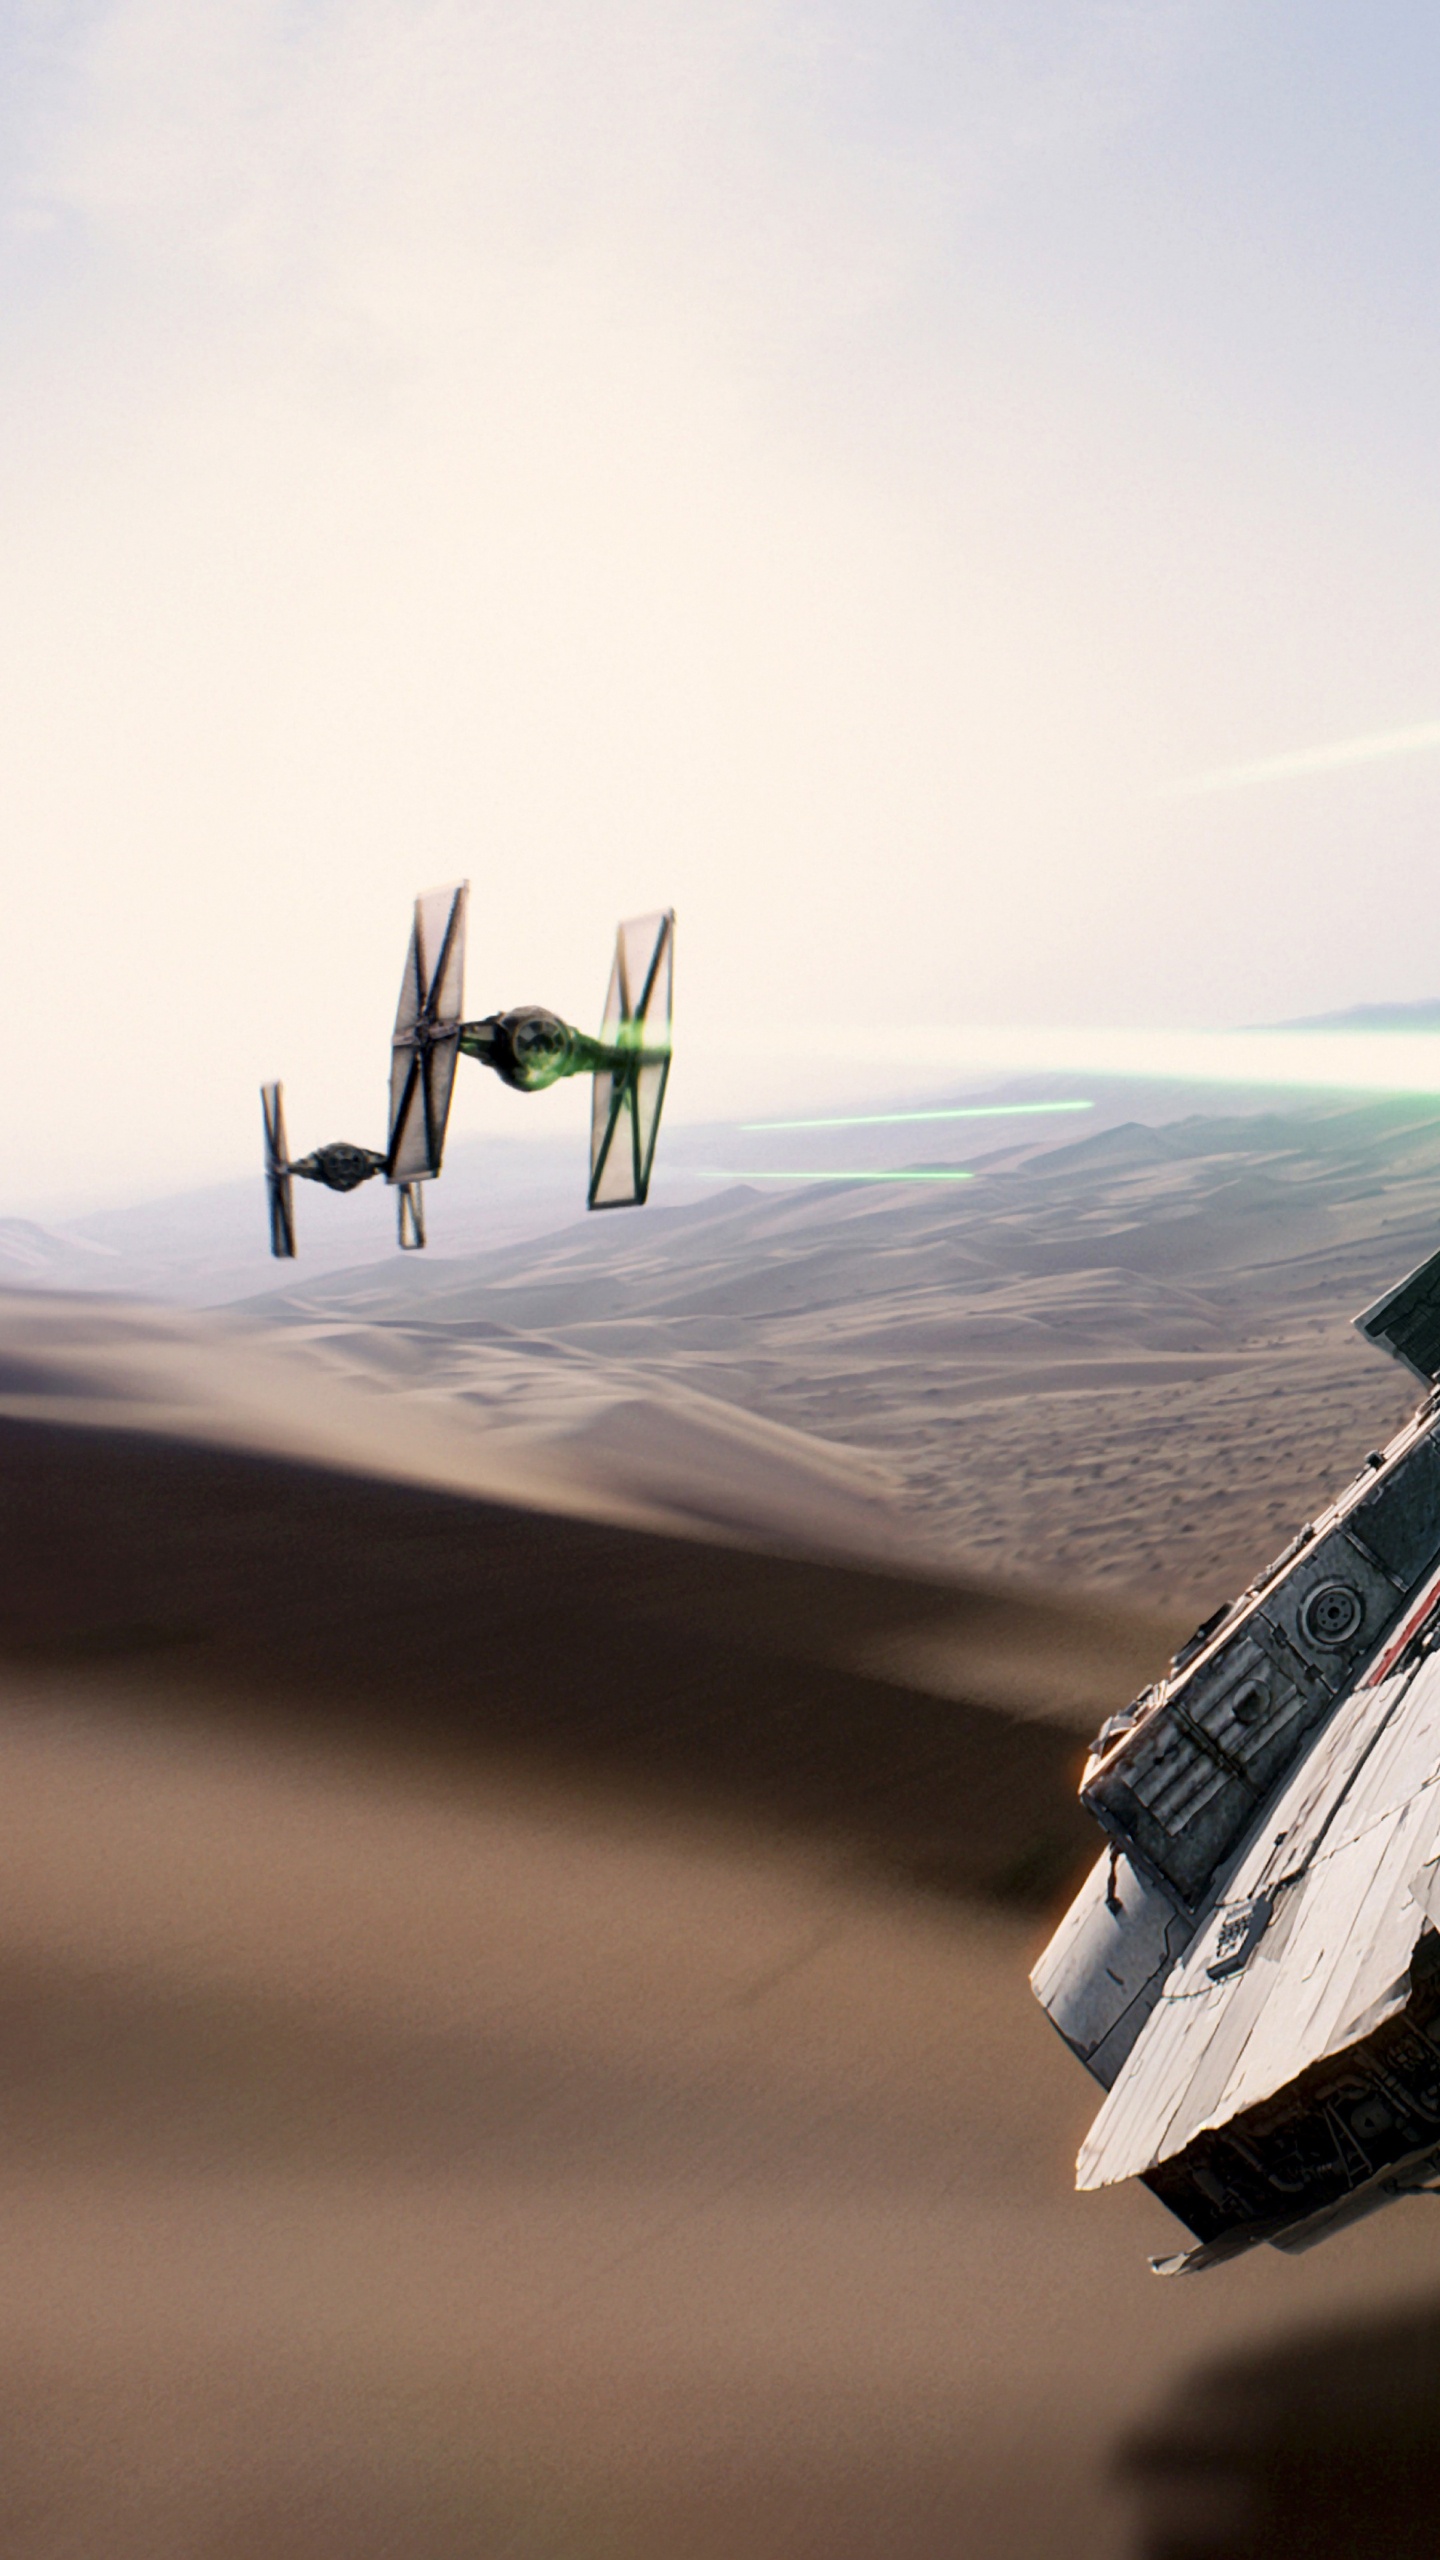 Millennium Falcon, Star Wars, Wing, The Force, Air Travel. Wallpaper in 1440x2560 Resolution